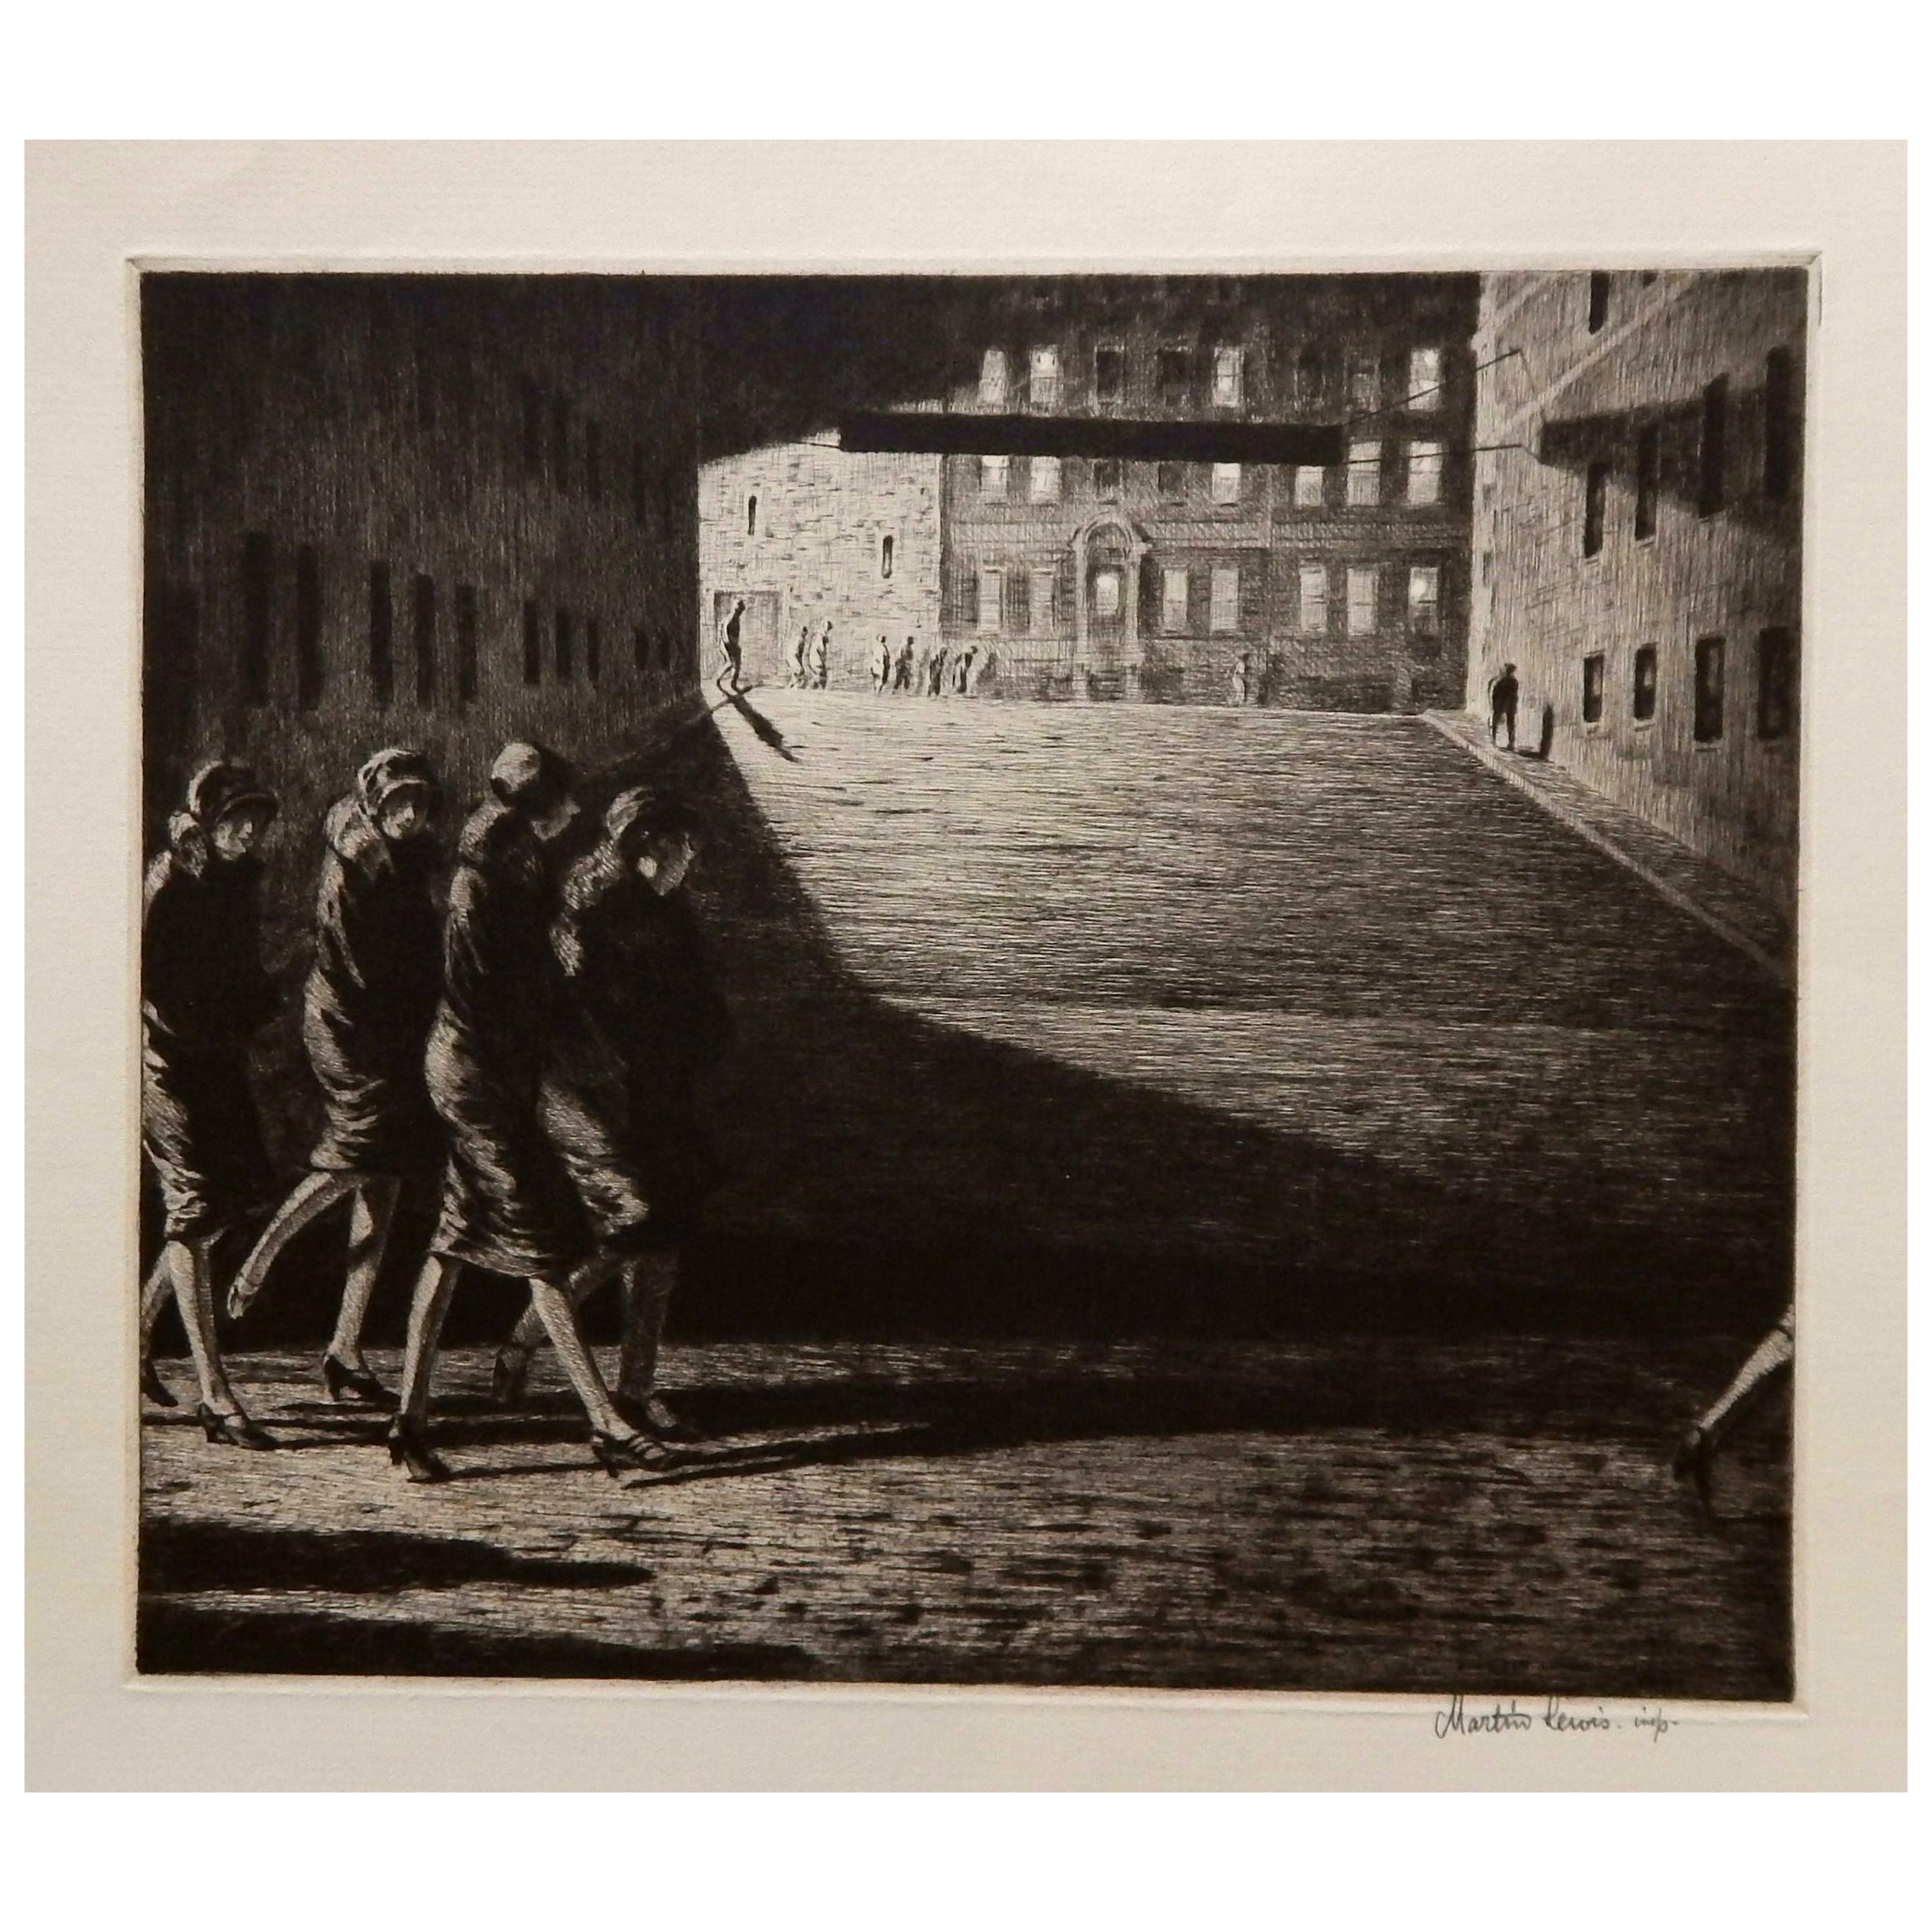 Martin Lewis Original Etching, 1927 - “Shadows on the Ramp” For Sale